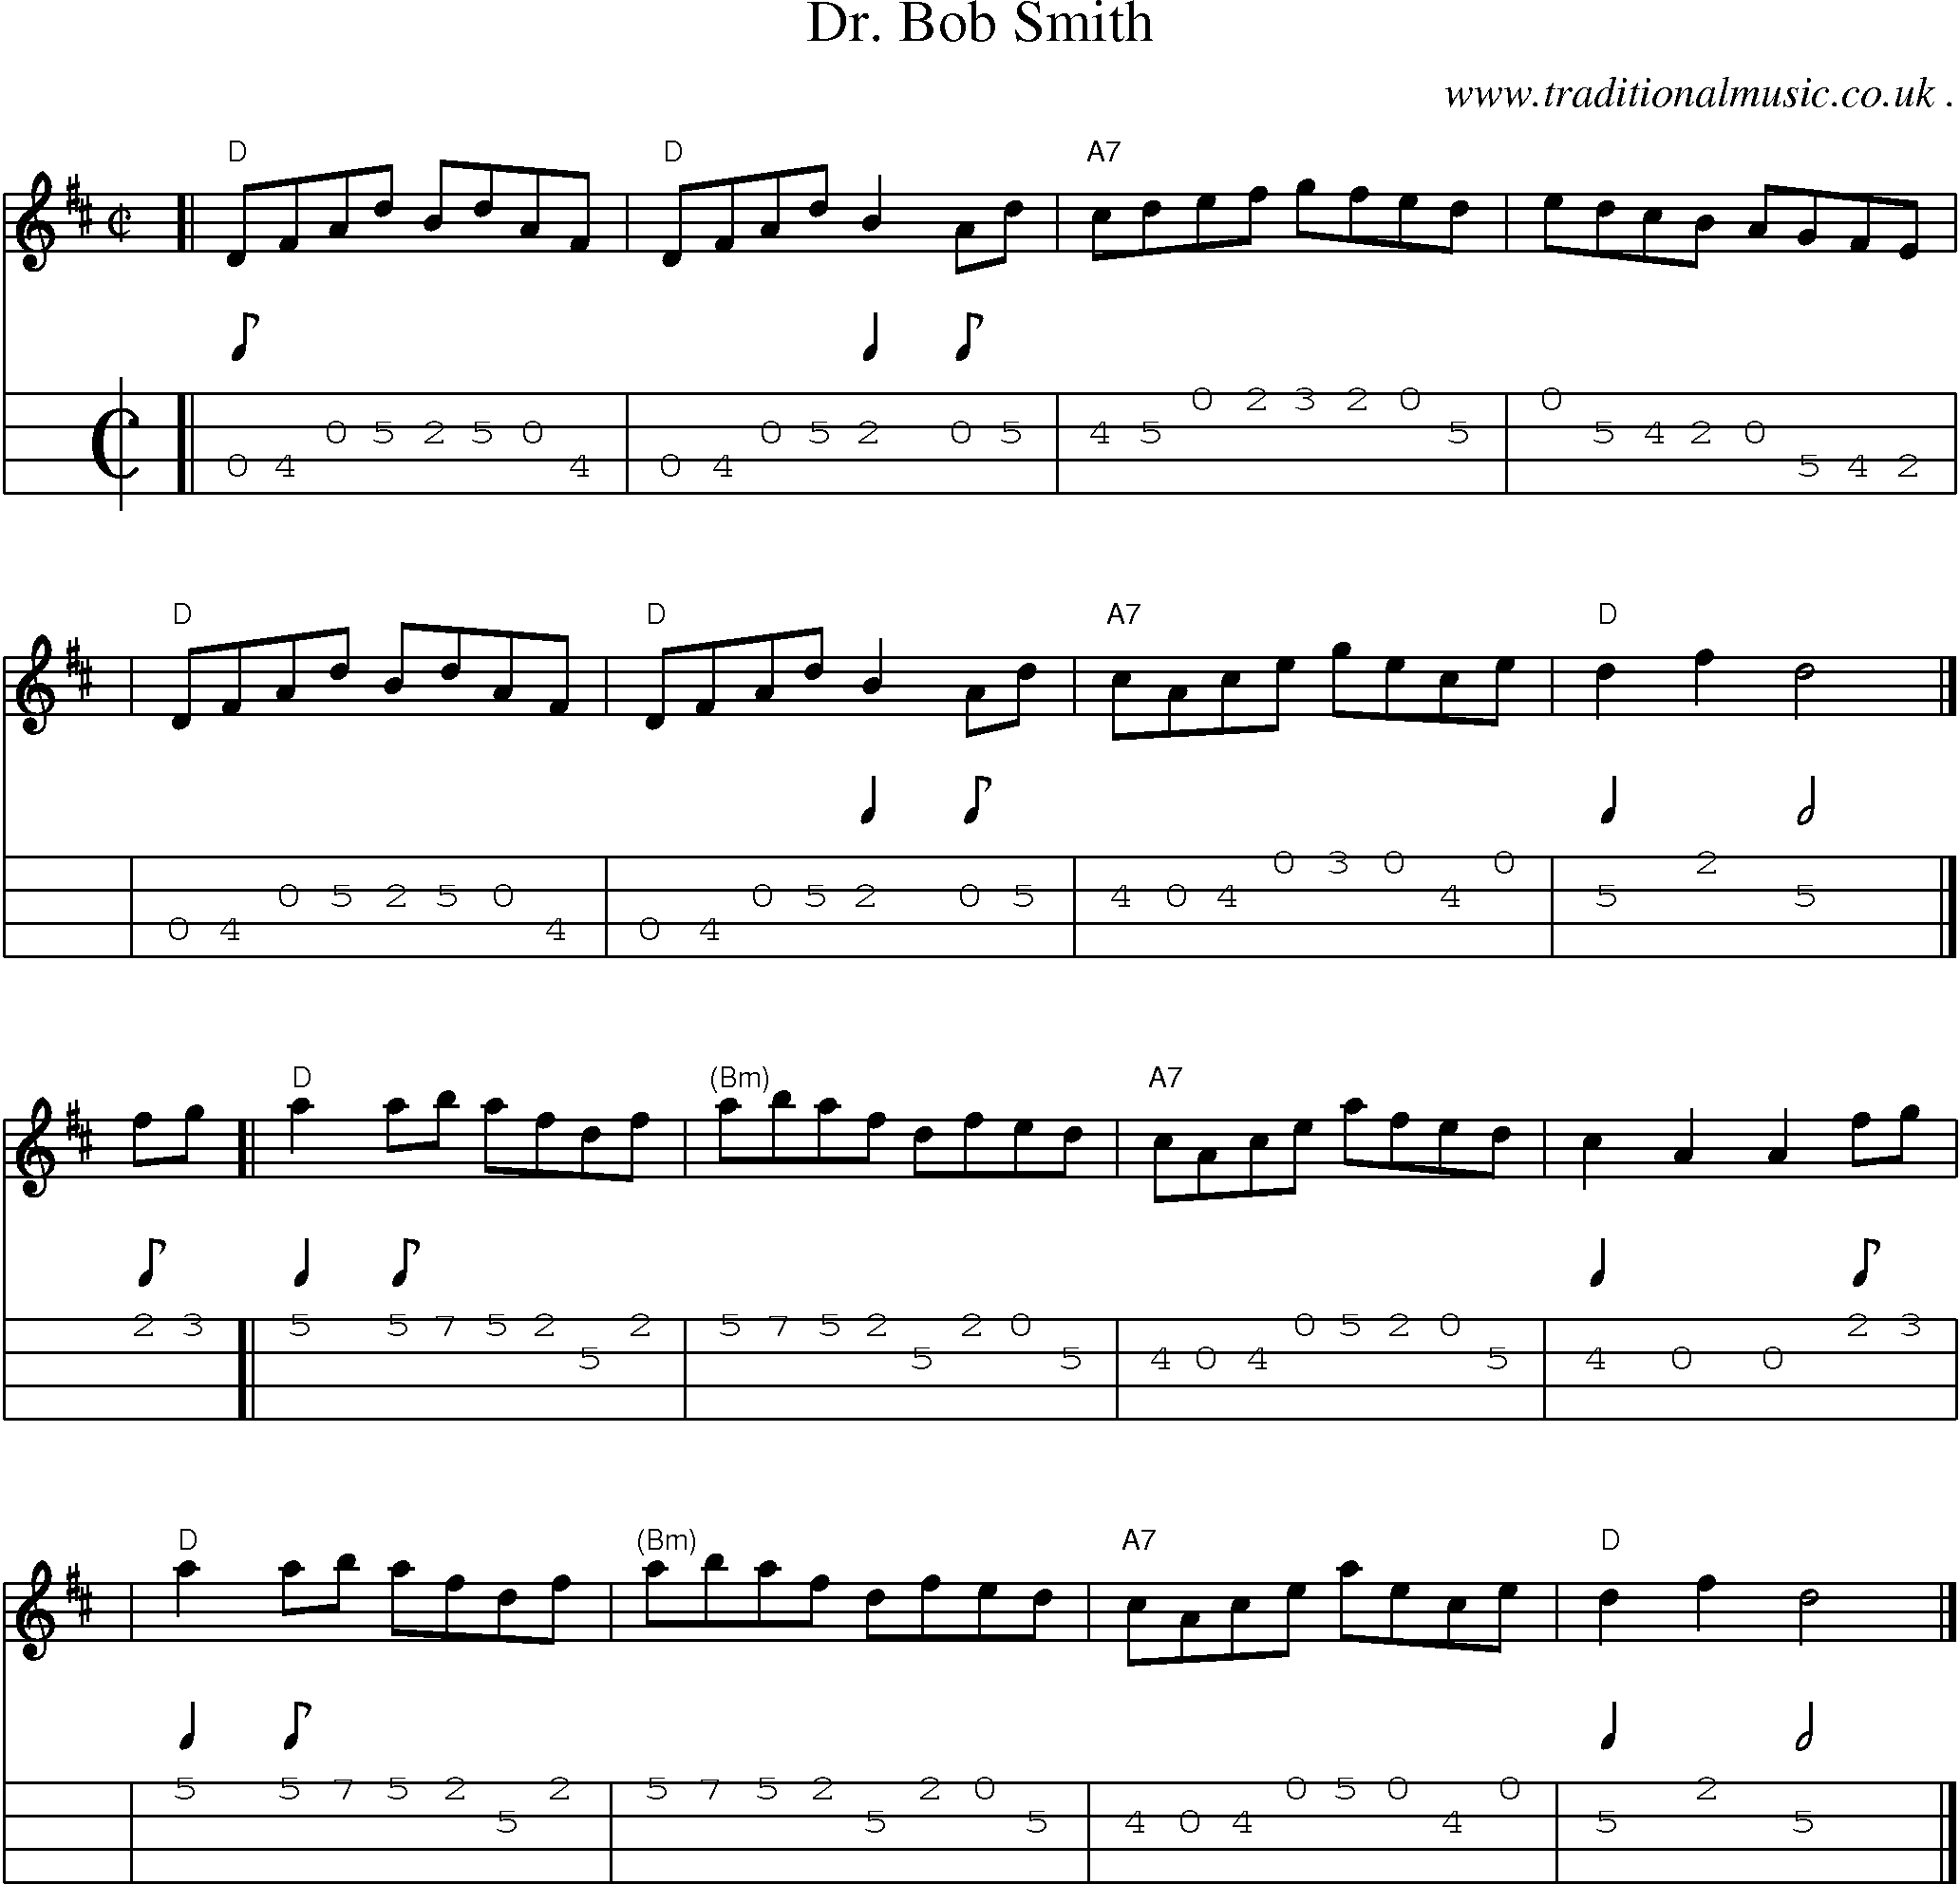 Sheet-music  score, Chords and Mandolin Tabs for Dr Bob Smith